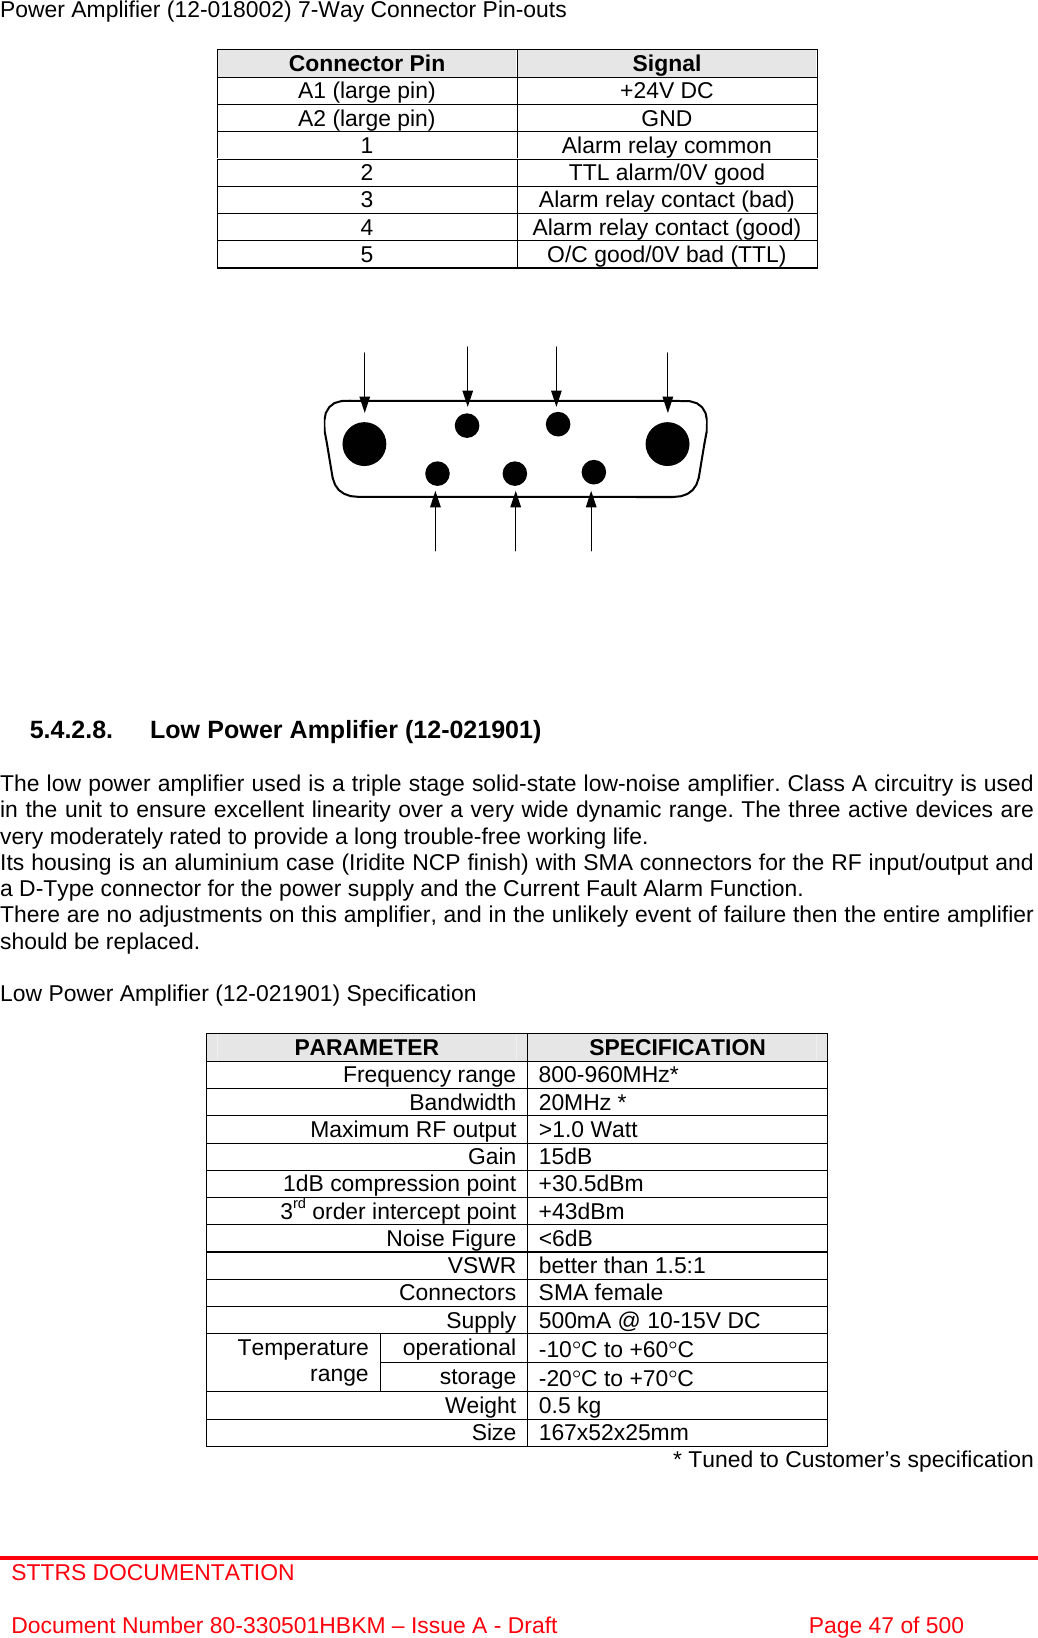 STTRS DOCUMENTATION  Document Number 80-330501HBKM – Issue A - Draft  Page 47 of 500   Power Amplifier (12-018002) 7-Way Connector Pin-outs  Connector Pin  Signal A1 (large pin)  +24V DC A2 (large pin)  GND 1  Alarm relay common 2  TTL alarm/0V good 3  Alarm relay contact (bad) 4  Alarm relay contact (good) 5  O/C good/0V bad (TTL)                  5.4.2.8.  Low Power Amplifier (12-021901)  The low power amplifier used is a triple stage solid-state low-noise amplifier. Class A circuitry is used in the unit to ensure excellent linearity over a very wide dynamic range. The three active devices are very moderately rated to provide a long trouble-free working life.  Its housing is an aluminium case (Iridite NCP finish) with SMA connectors for the RF input/output and a D-Type connector for the power supply and the Current Fault Alarm Function. There are no adjustments on this amplifier, and in the unlikely event of failure then the entire amplifier should be replaced.  Low Power Amplifier (12-021901) Specification  PARAMETER  SPECIFICATION Frequency range 800-960MHz* Bandwidth 20MHz * Maximum RF output &gt;1.0 Watt Gain 15dB 1dB compression point +30.5dBm 3rd order intercept point +43dBm Noise Figure &lt;6dB VSWR better than 1.5:1 Connectors SMA female Supply 500mA @ 10-15V DC operational -10°C to +60°C Temperature range  storage -20°C to +70°C Weight 0.5 kg Size 167x52x25mm * Tuned to Customer’s specification 